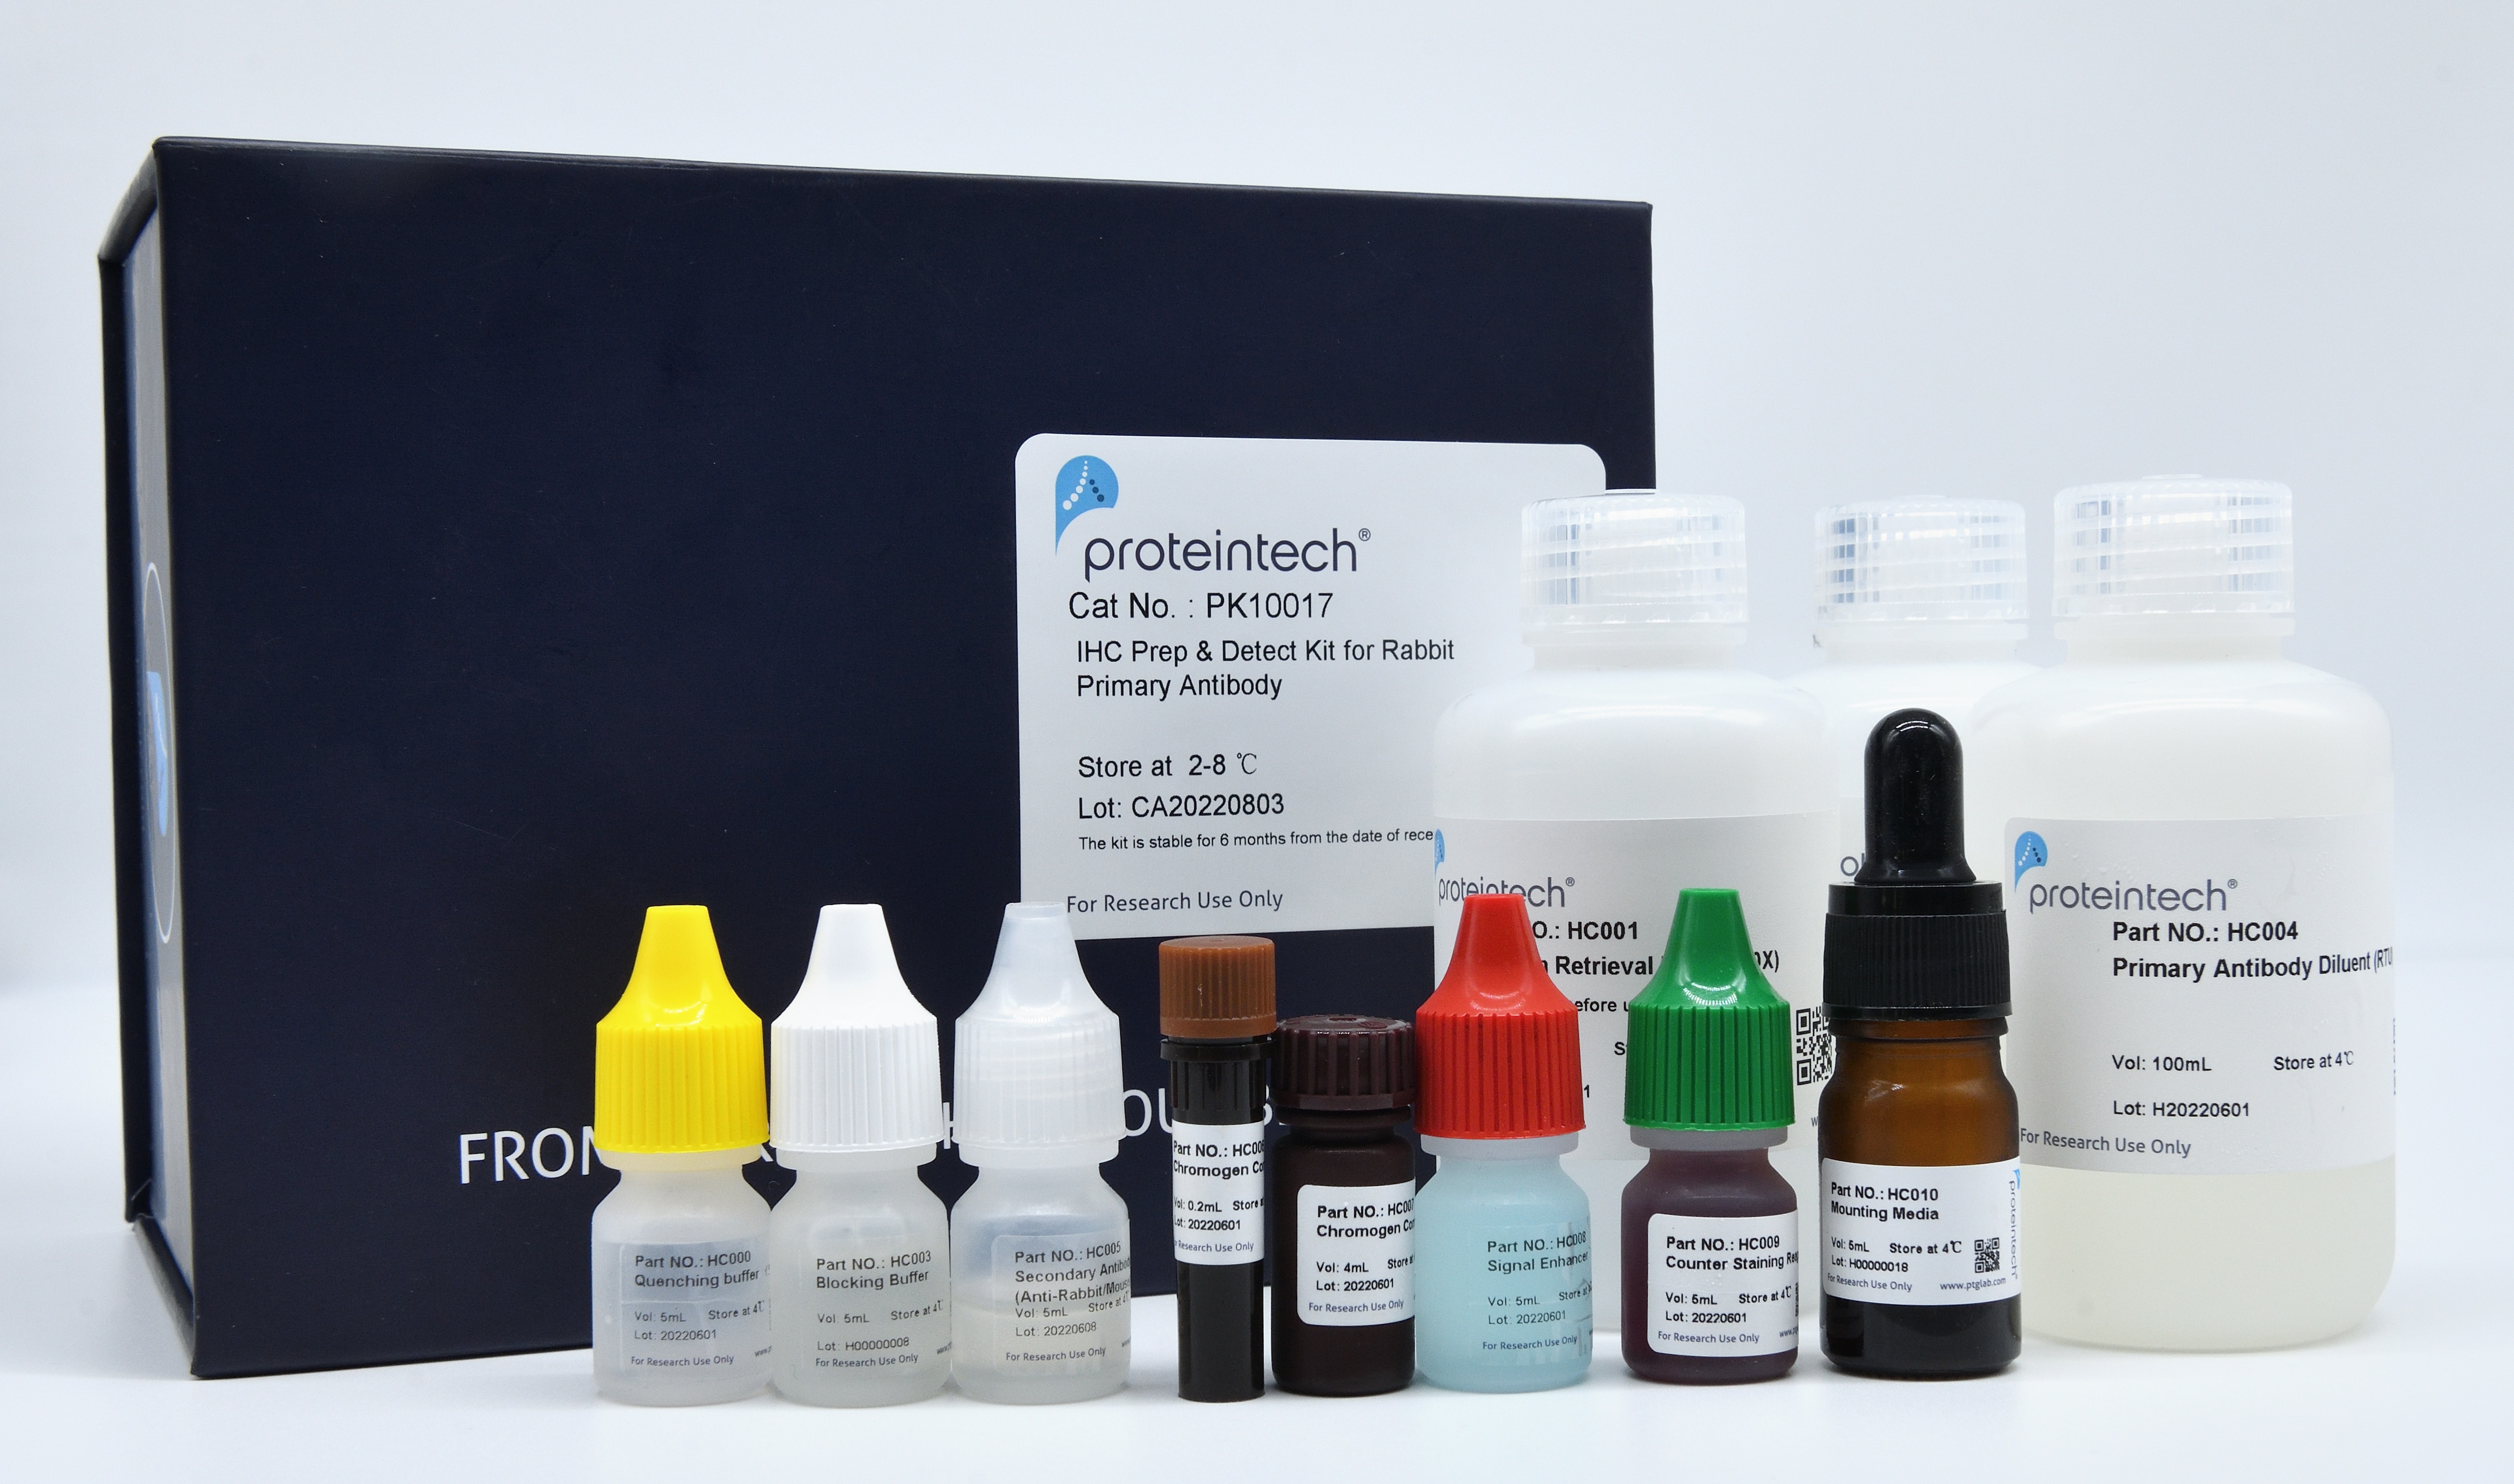 Proteintech IHC prep and detect kit product image